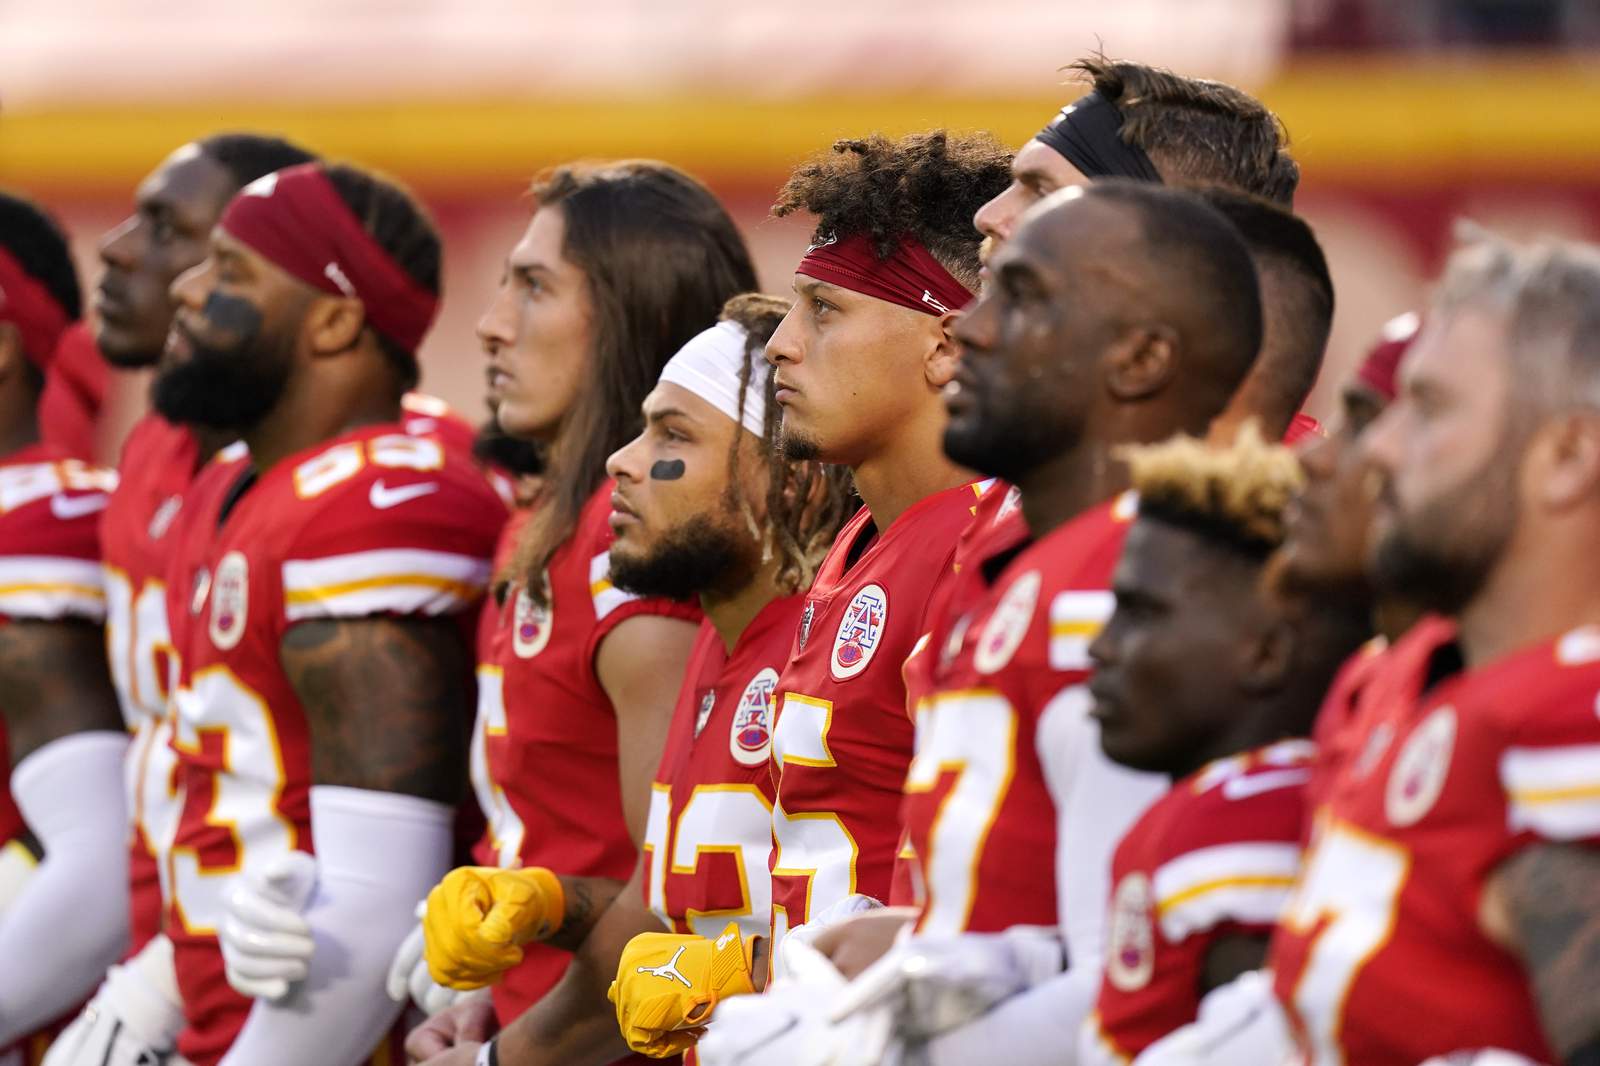 Chiefs, Texans booed as racial justice stand sparks outrage